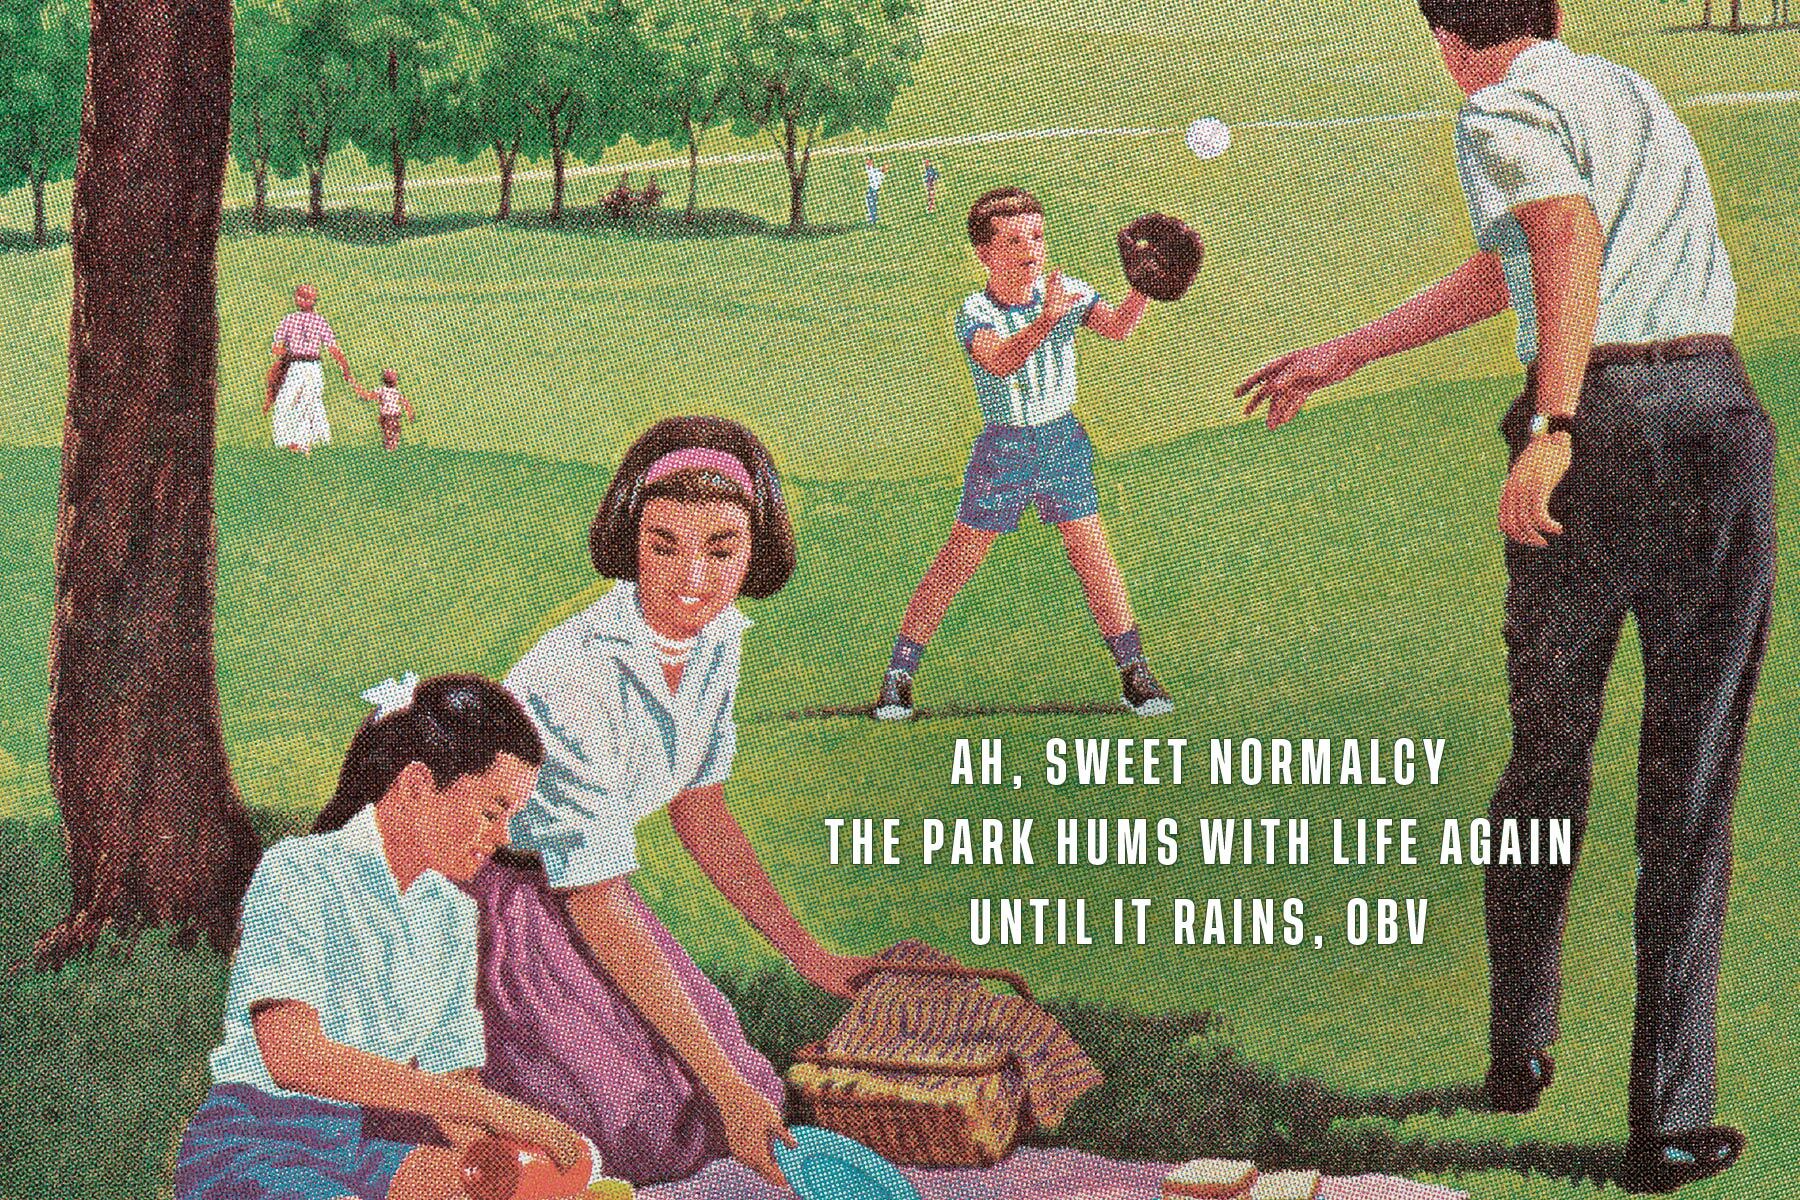 A 50s-style illustration of a day in the park with a funny haiku laid over it, which can be read below.